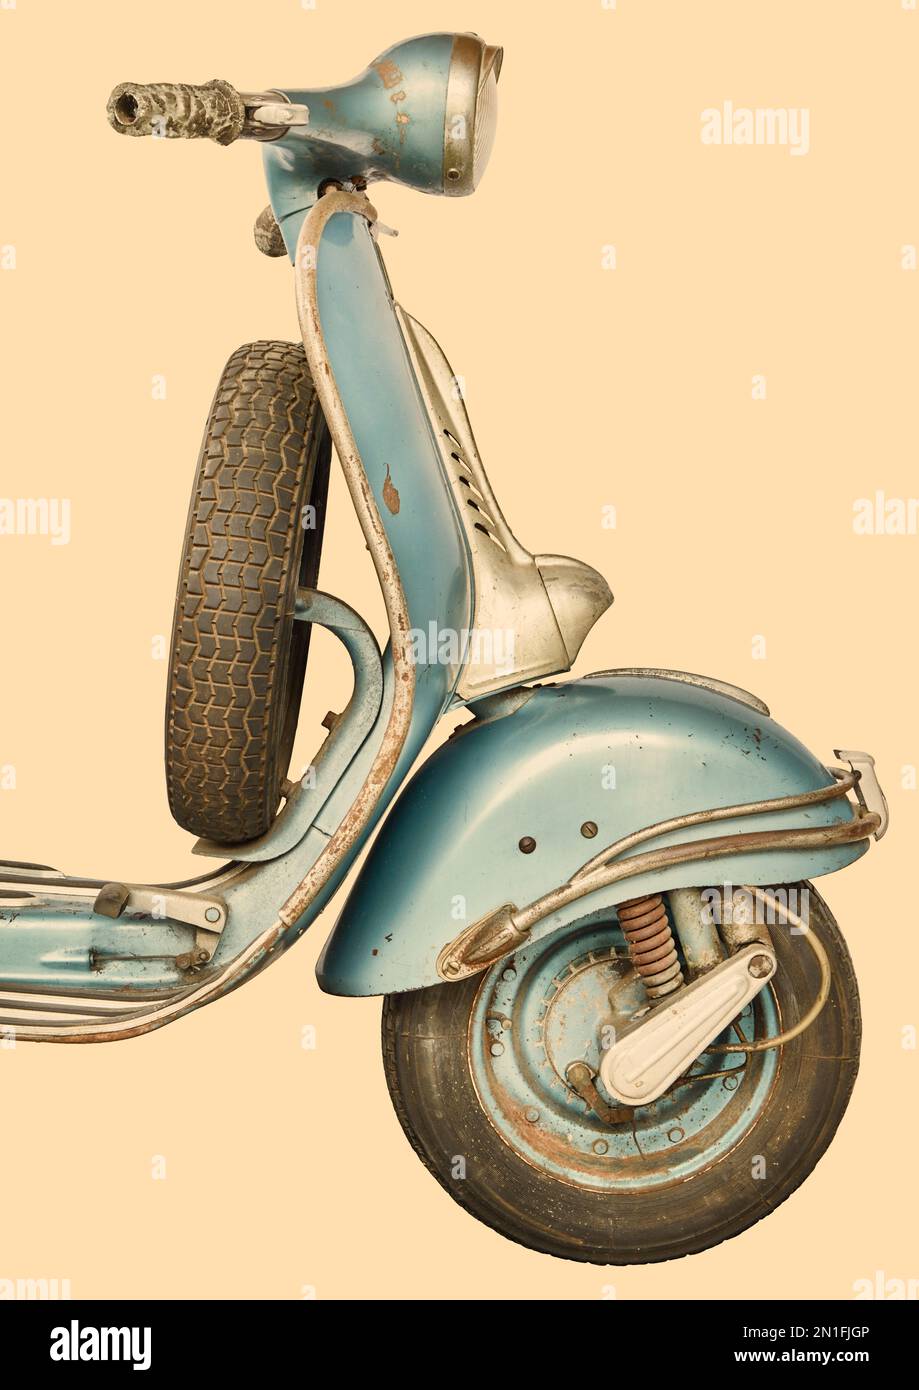 Retro styled side view of an unrestored vintage blue Italian scooter Stock Photo